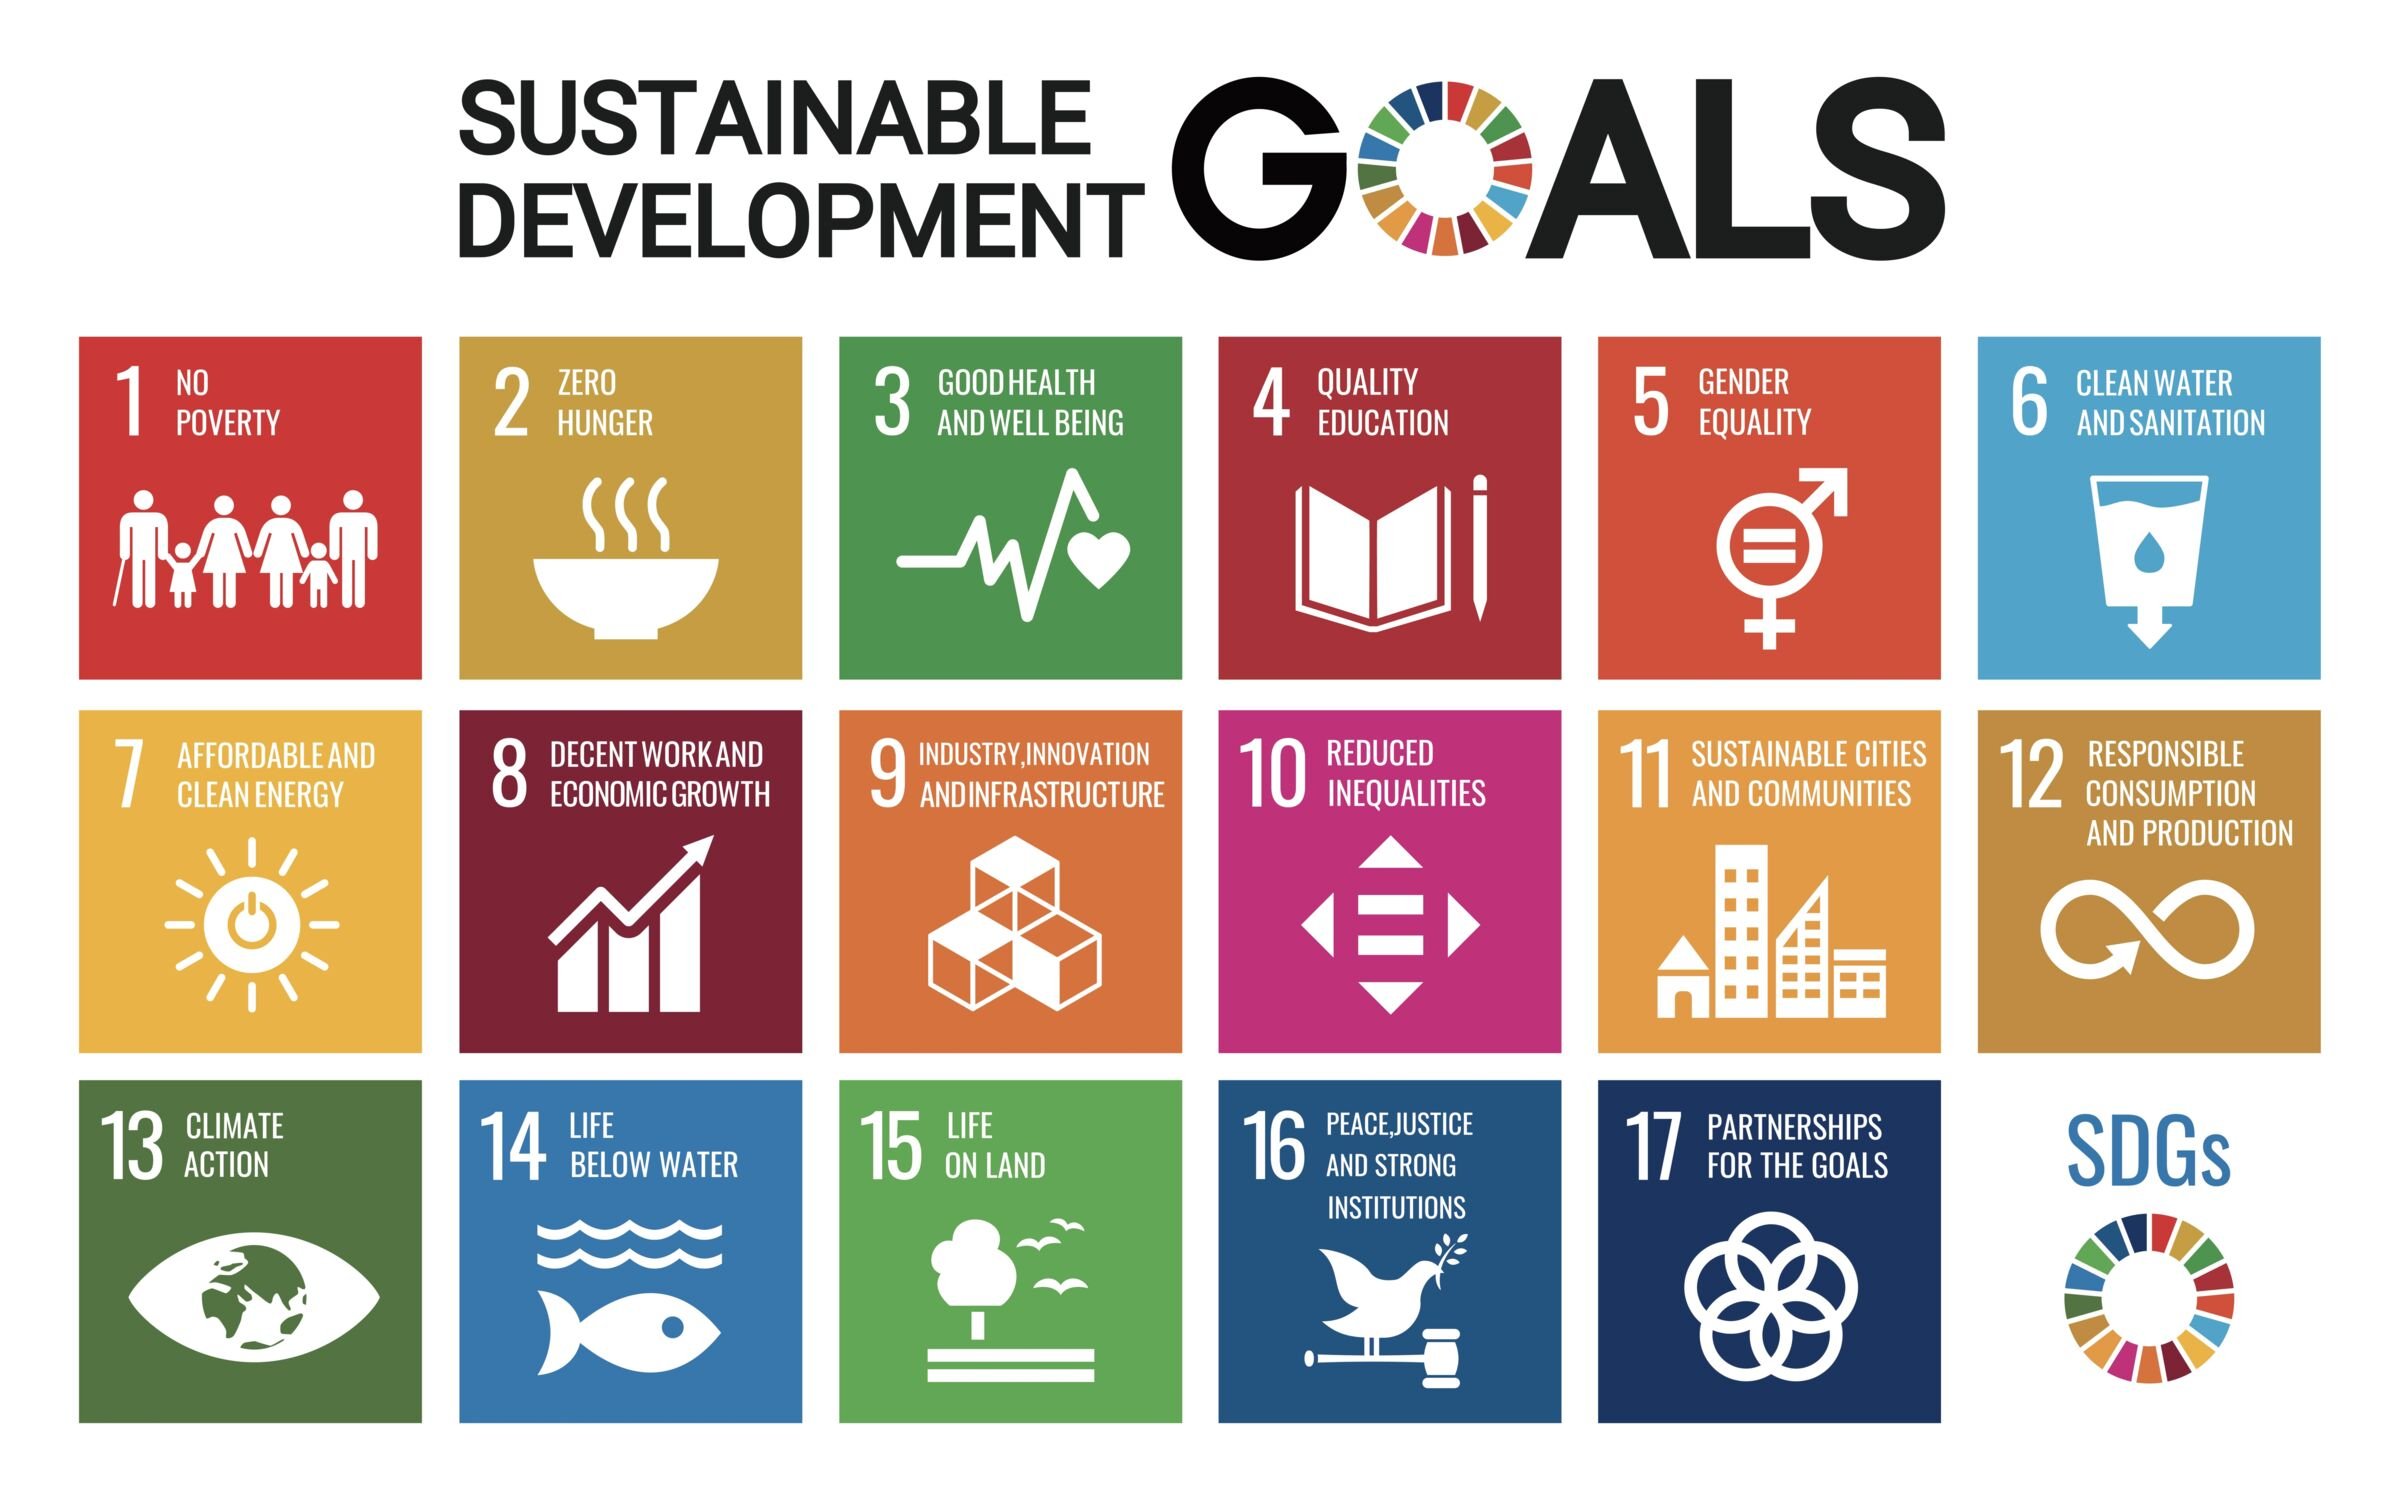 17 of the sustainable development goals